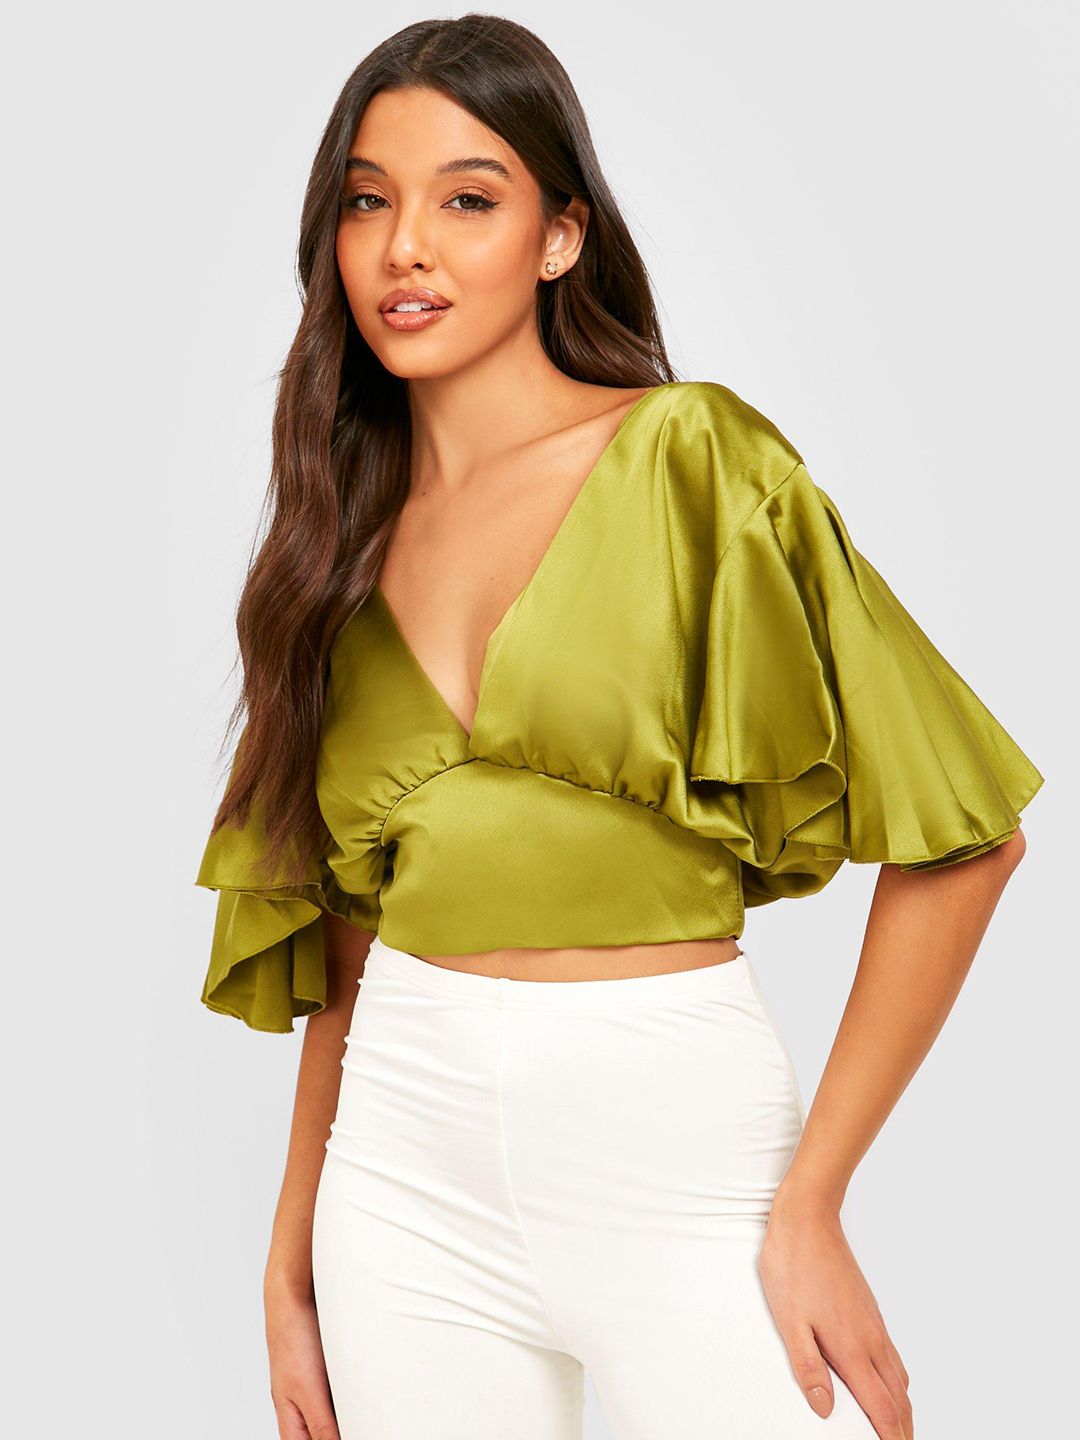 Boohoo Green Satin Finish Plunge V-Neck Crop Top Price in India